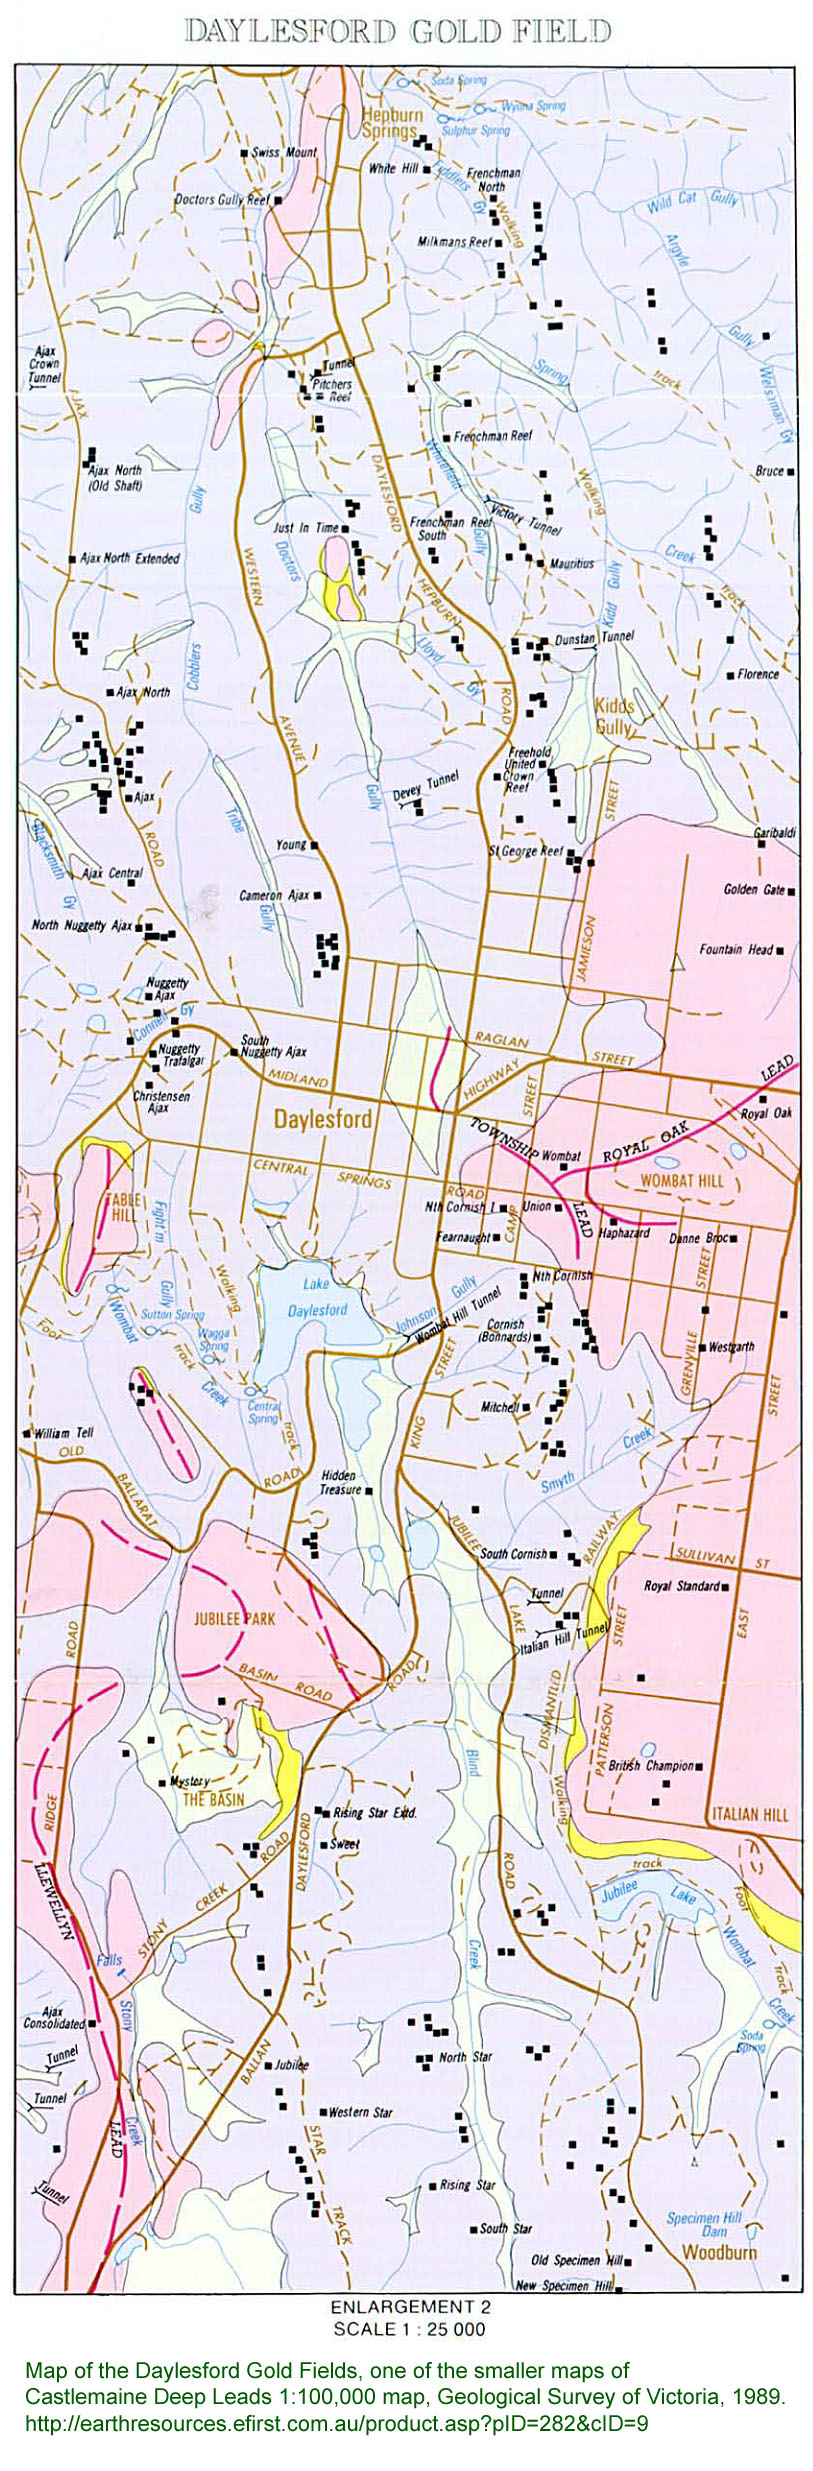 Map of the Daylesford Gold Fields, one of the smaller maps of Castlemaine Deep Leads 1:100,000 map, Geological Survey of Victoria, 1989. http://earthresources.efirst.com.au/product.asp?pID=282&cID=9